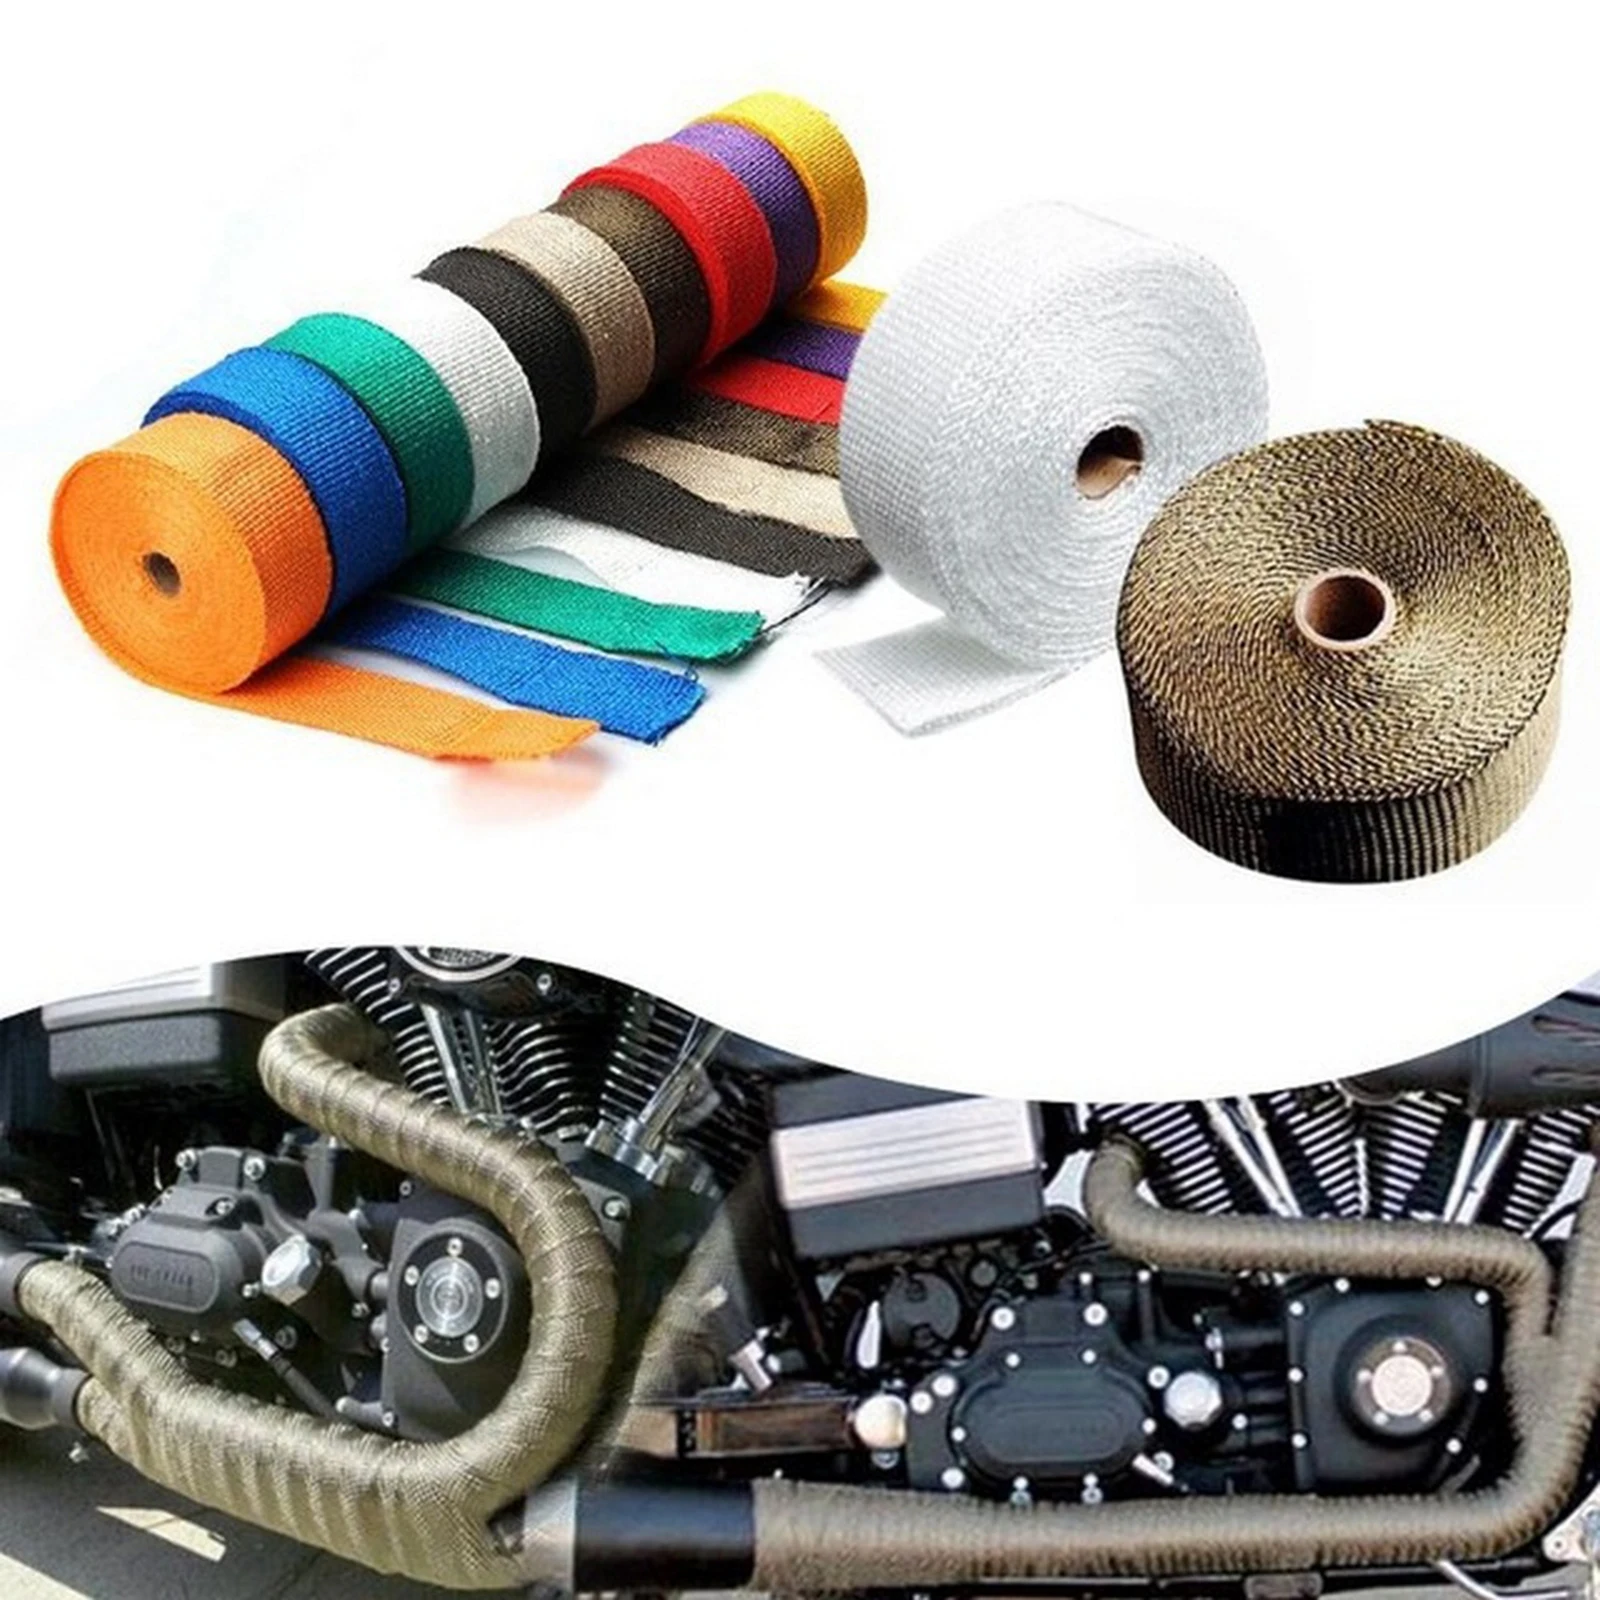 

Motorcycle Exhaust Heat Wrap Muffler Thermal Tape Heat Shield Insulation Systems Motorcycle Exhaust Thermal Band Muffler Wrap